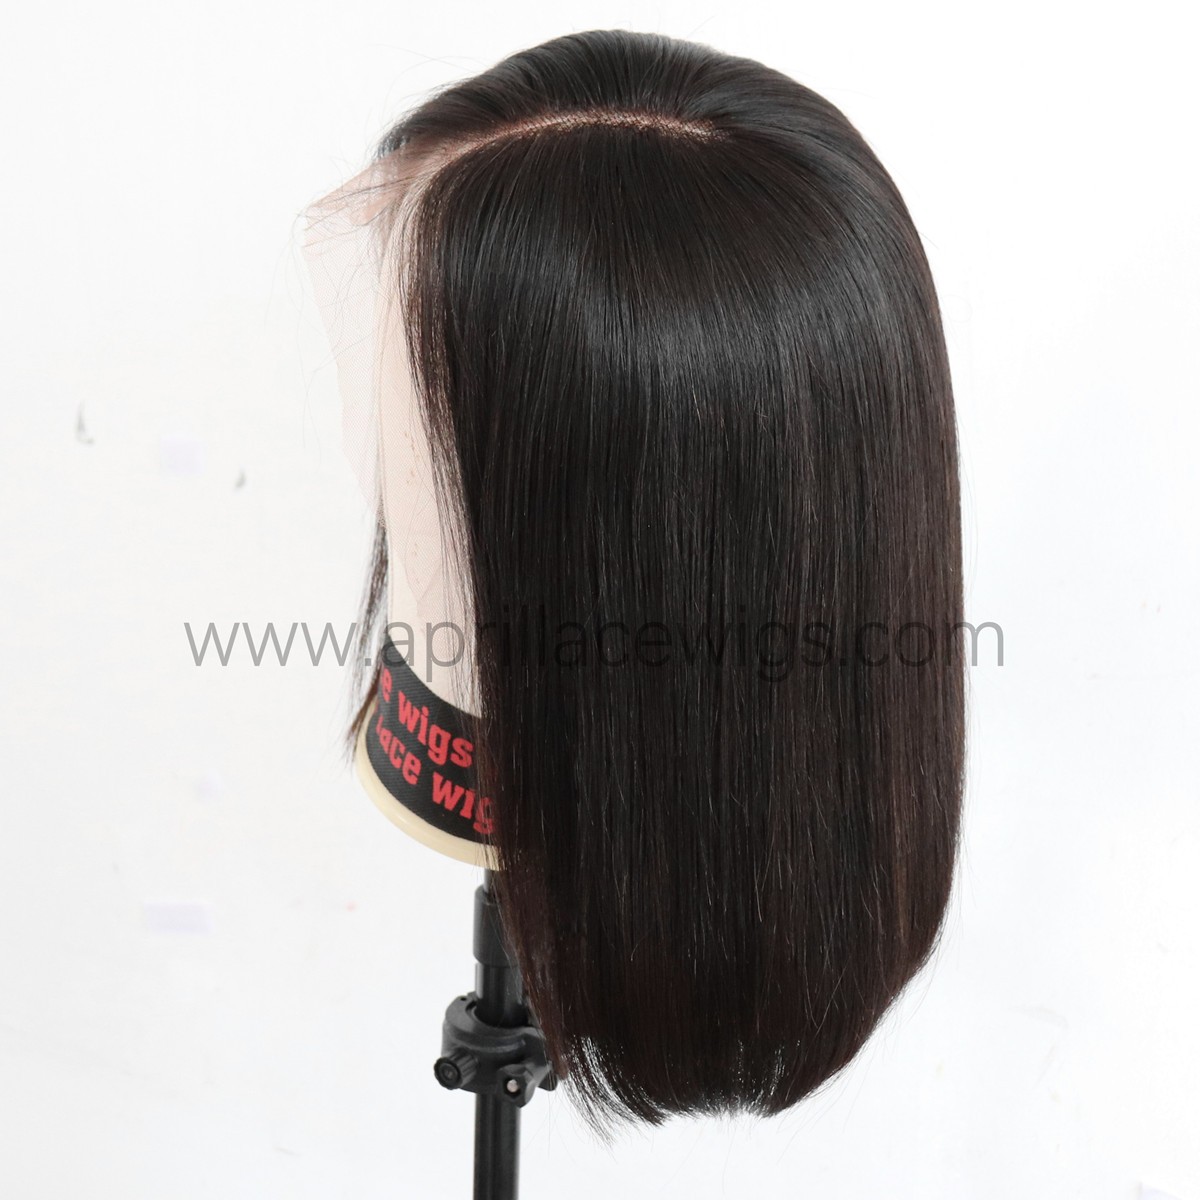 150% density 13x6 lace front wig, bob lace wig